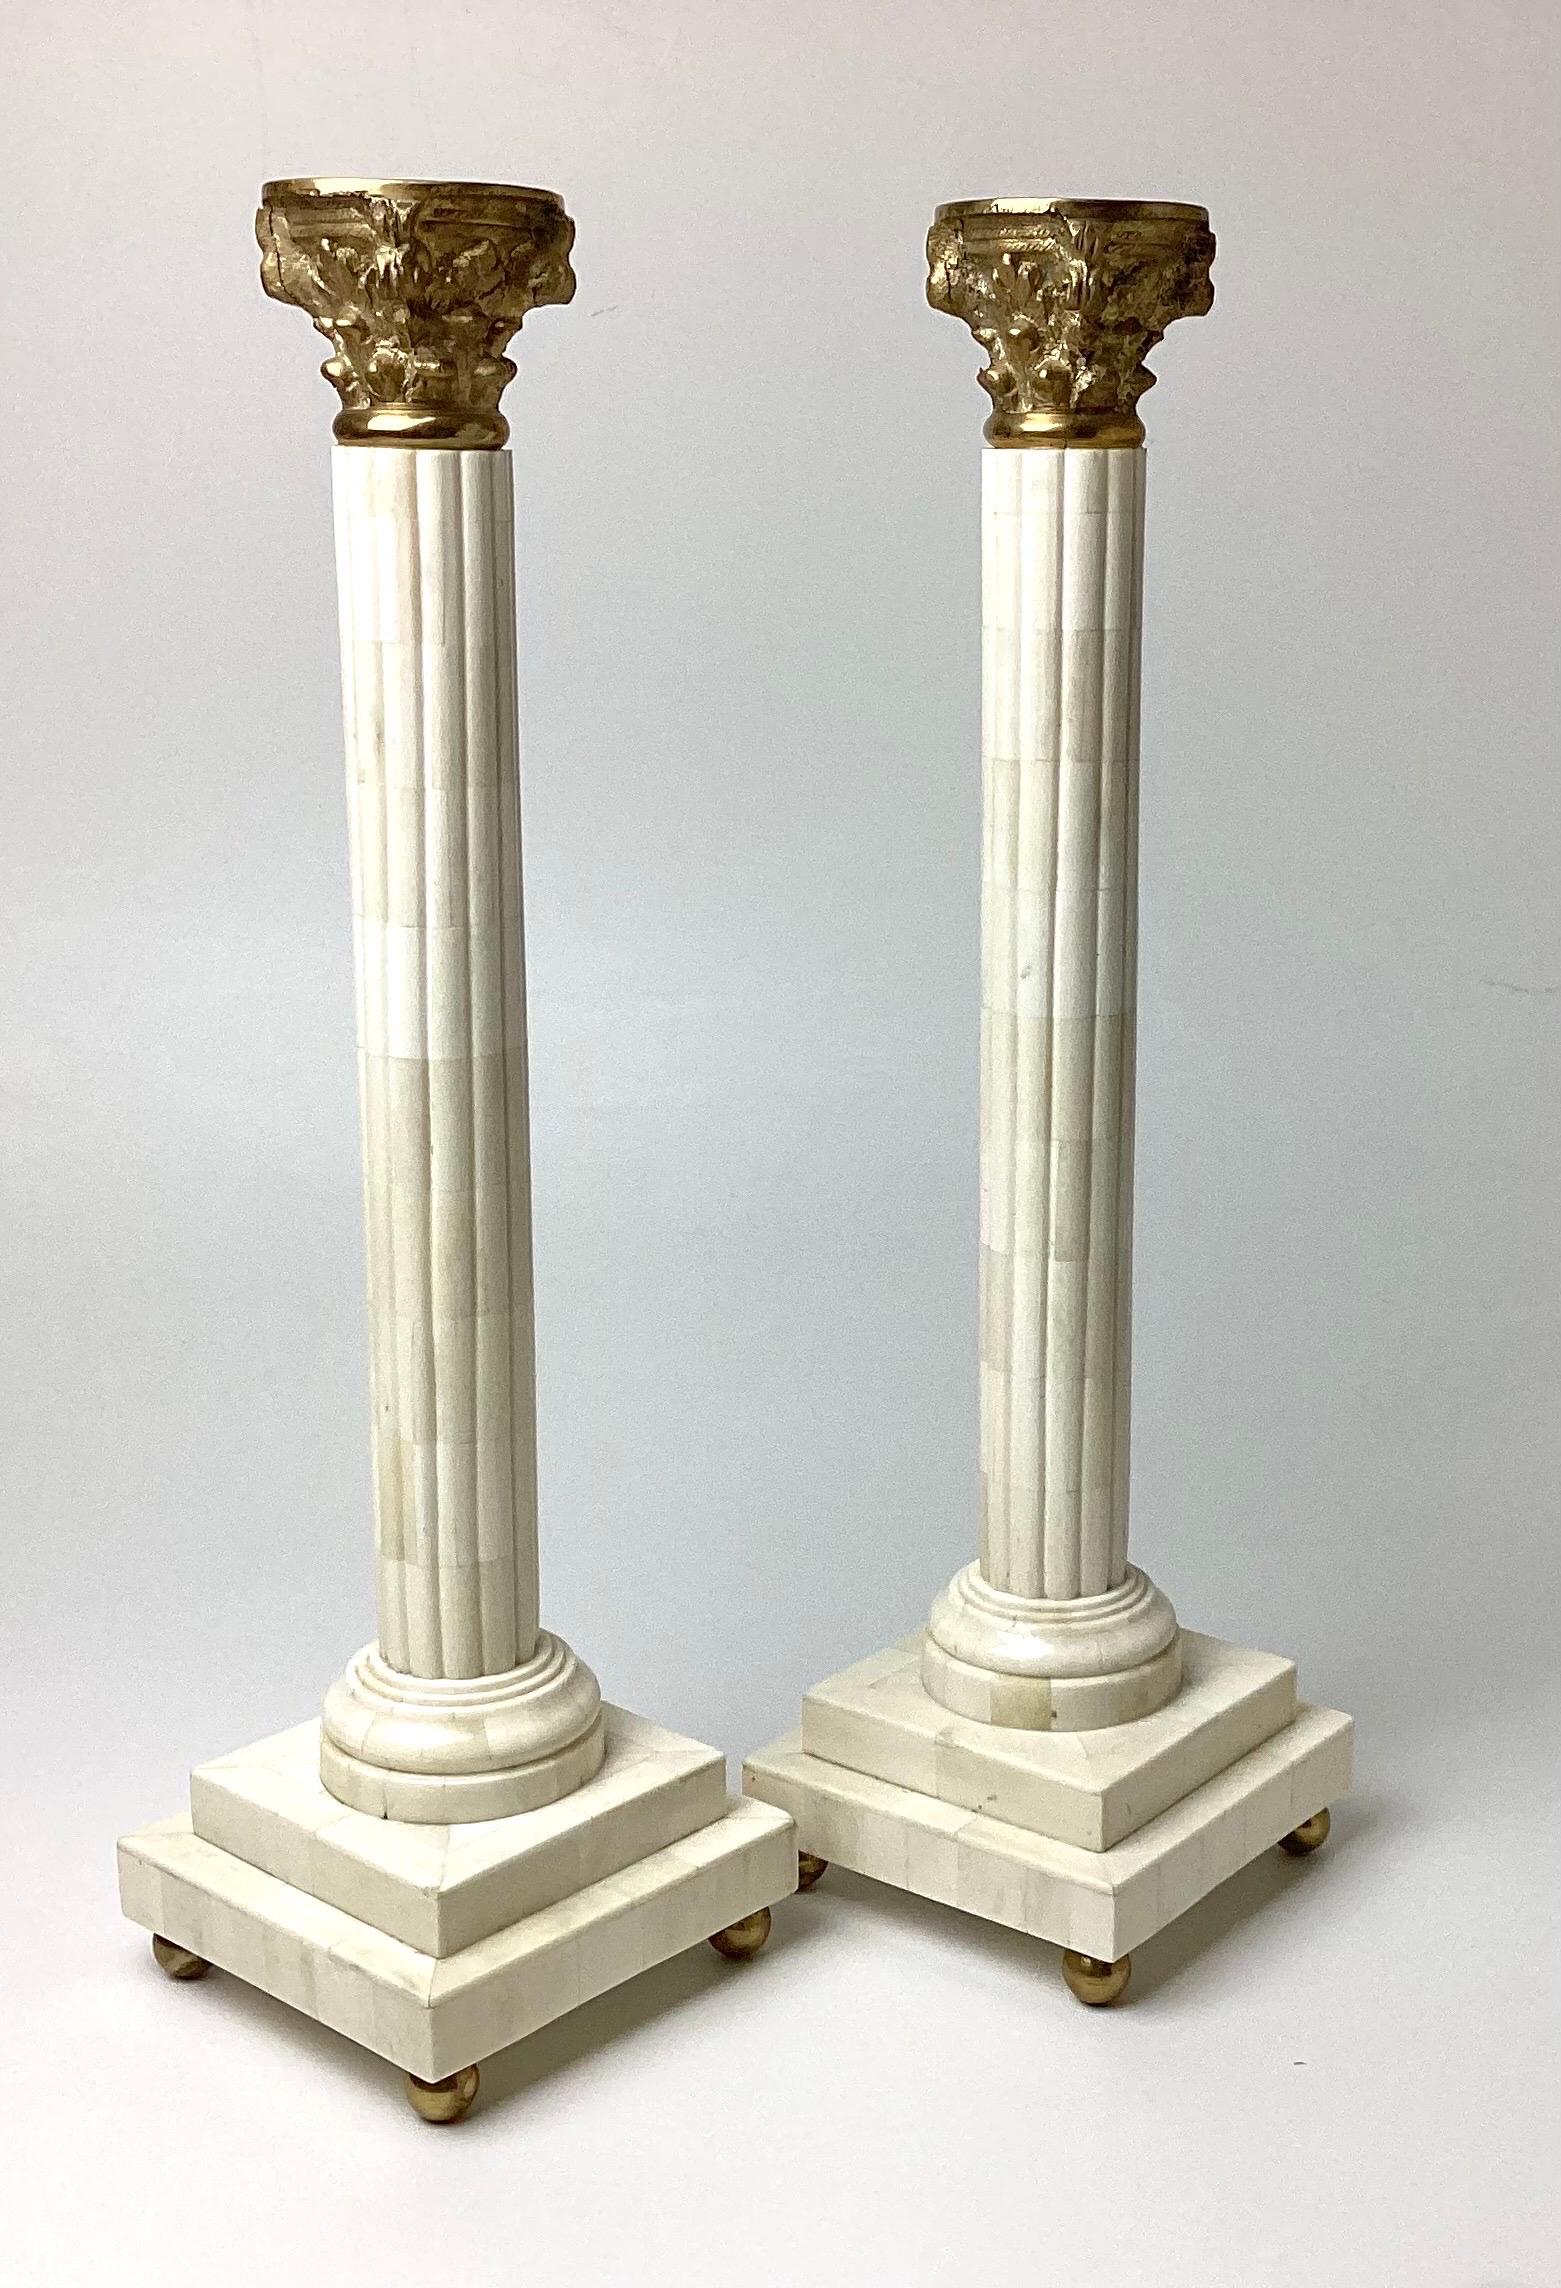 Pair Neoclassical Column Candlesticks with Cast bronze or brass mounts. Columbus are made out of stone.